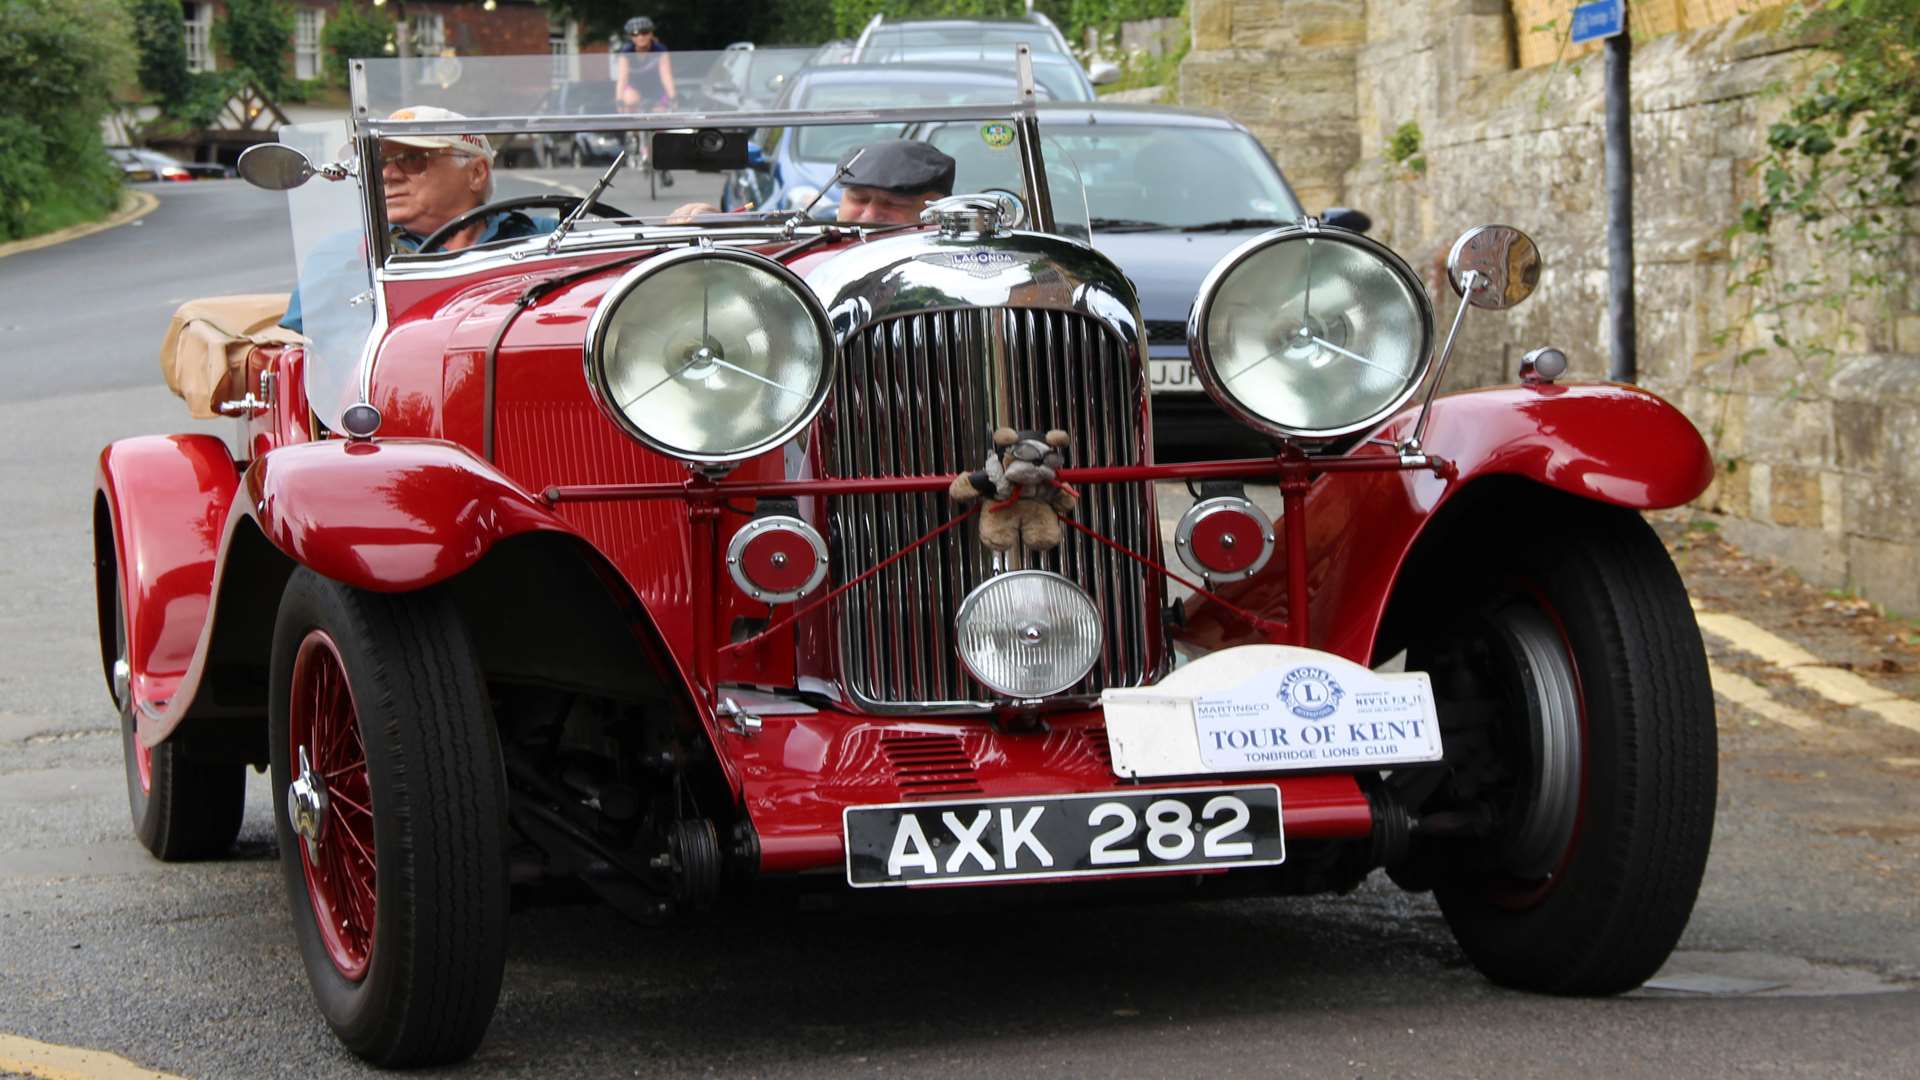 A 1933 Lagonda 1680 T7 taking part in last year's rally